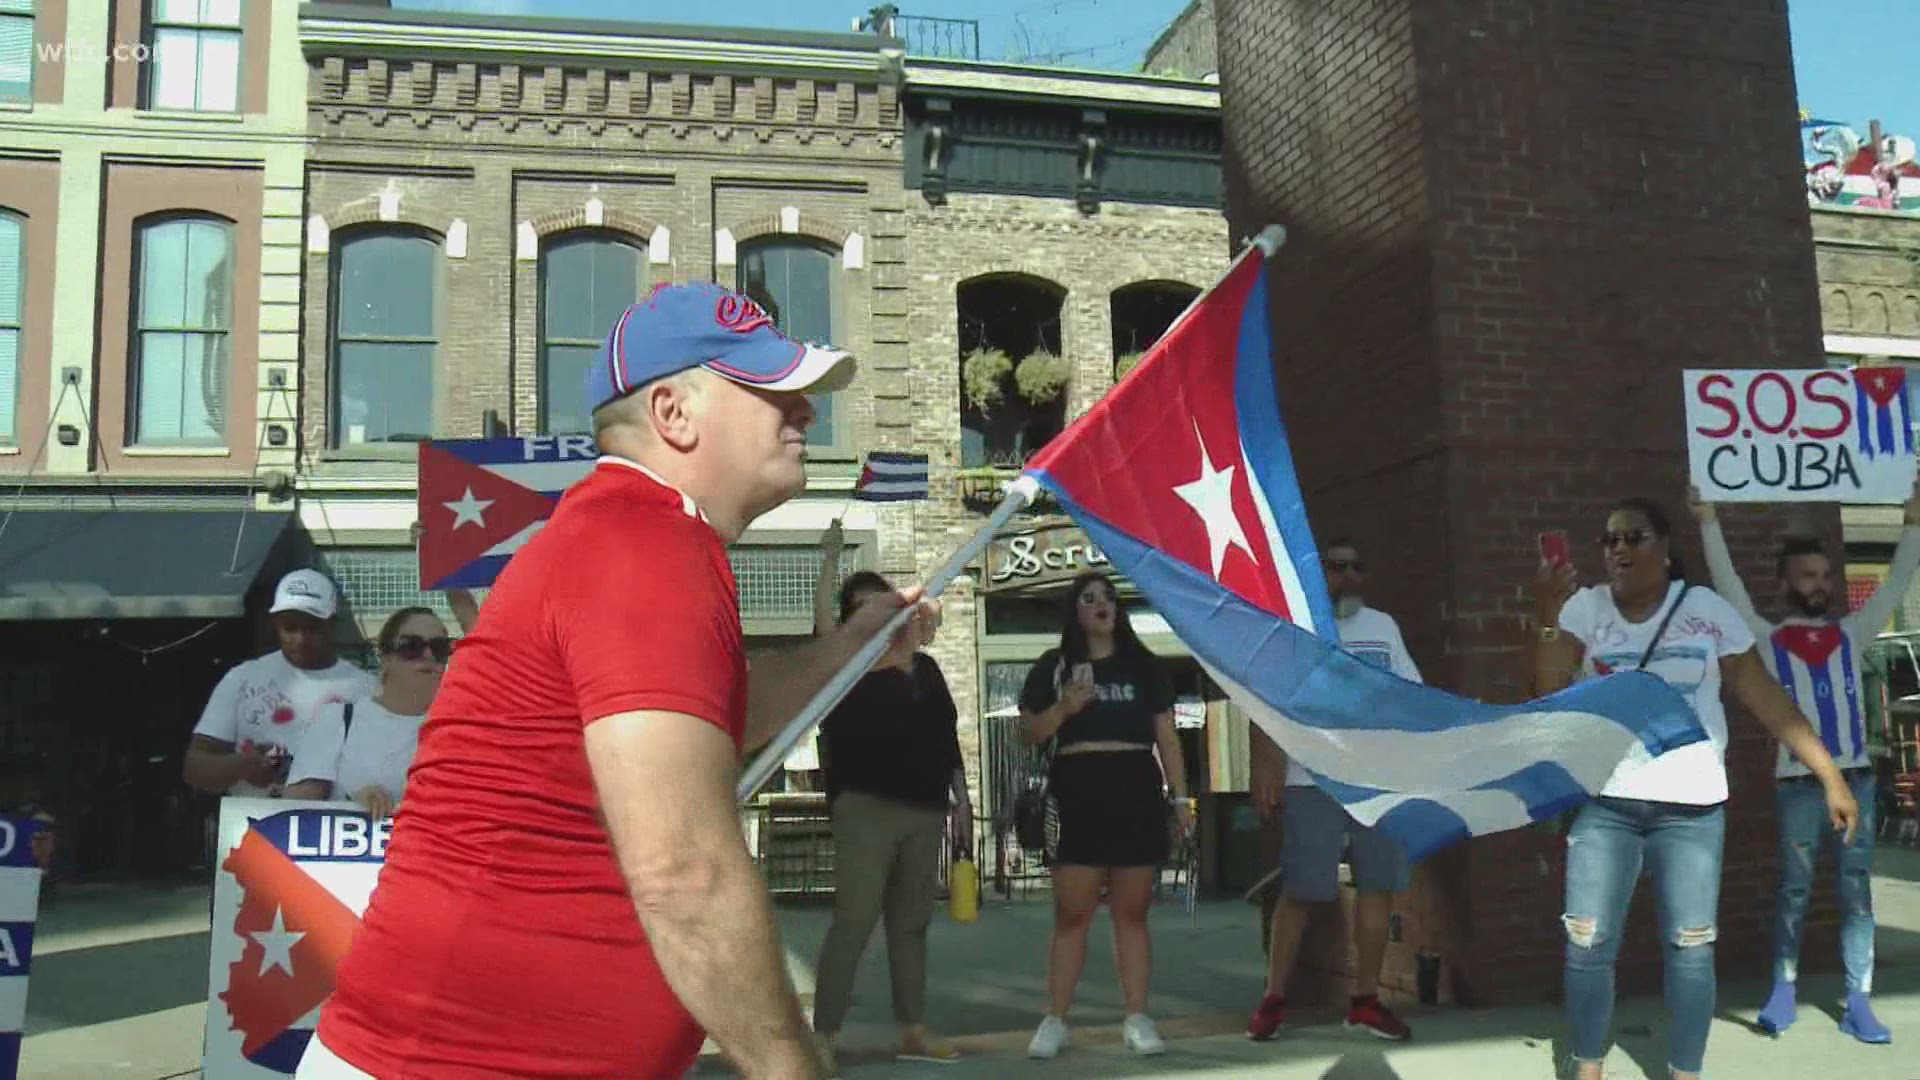 An event, titled 'Patria y Vida', took place in Knoxville Thursday evening in Market Square. Close to two dozen people showed up with signs and flags.